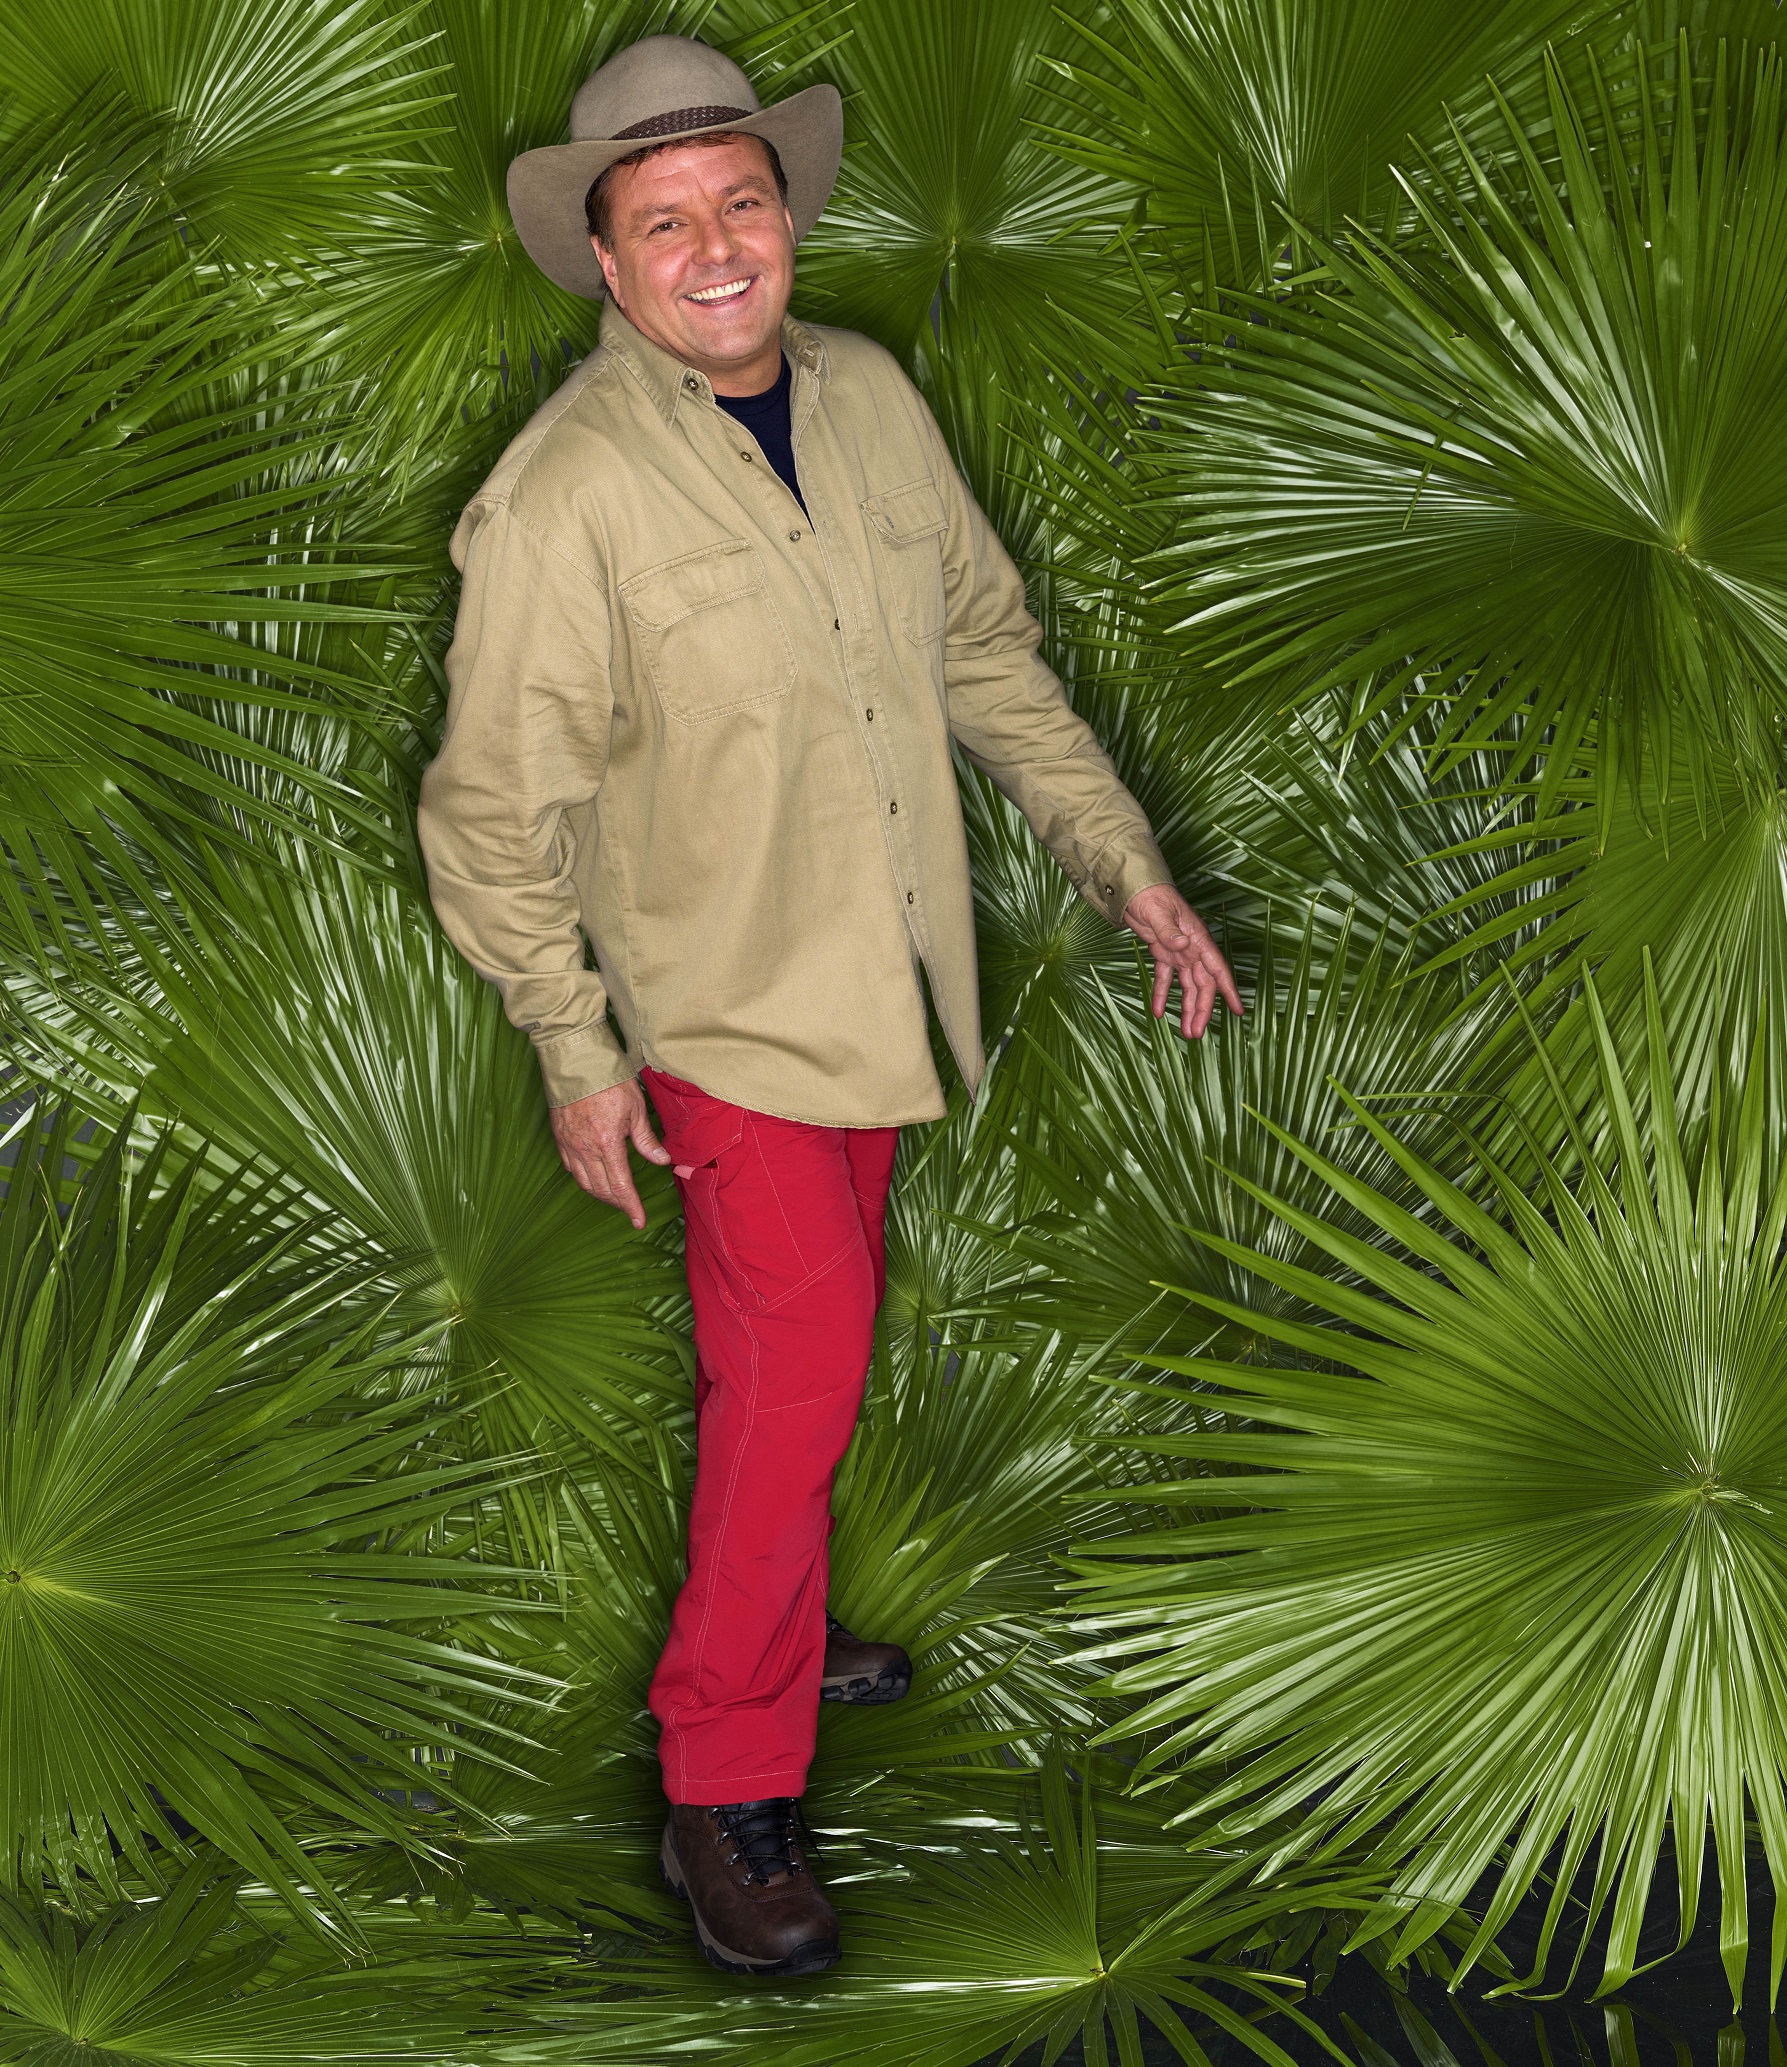 Jungle drama rumbles on after Martin Roberts voted out of I'm a Celeb